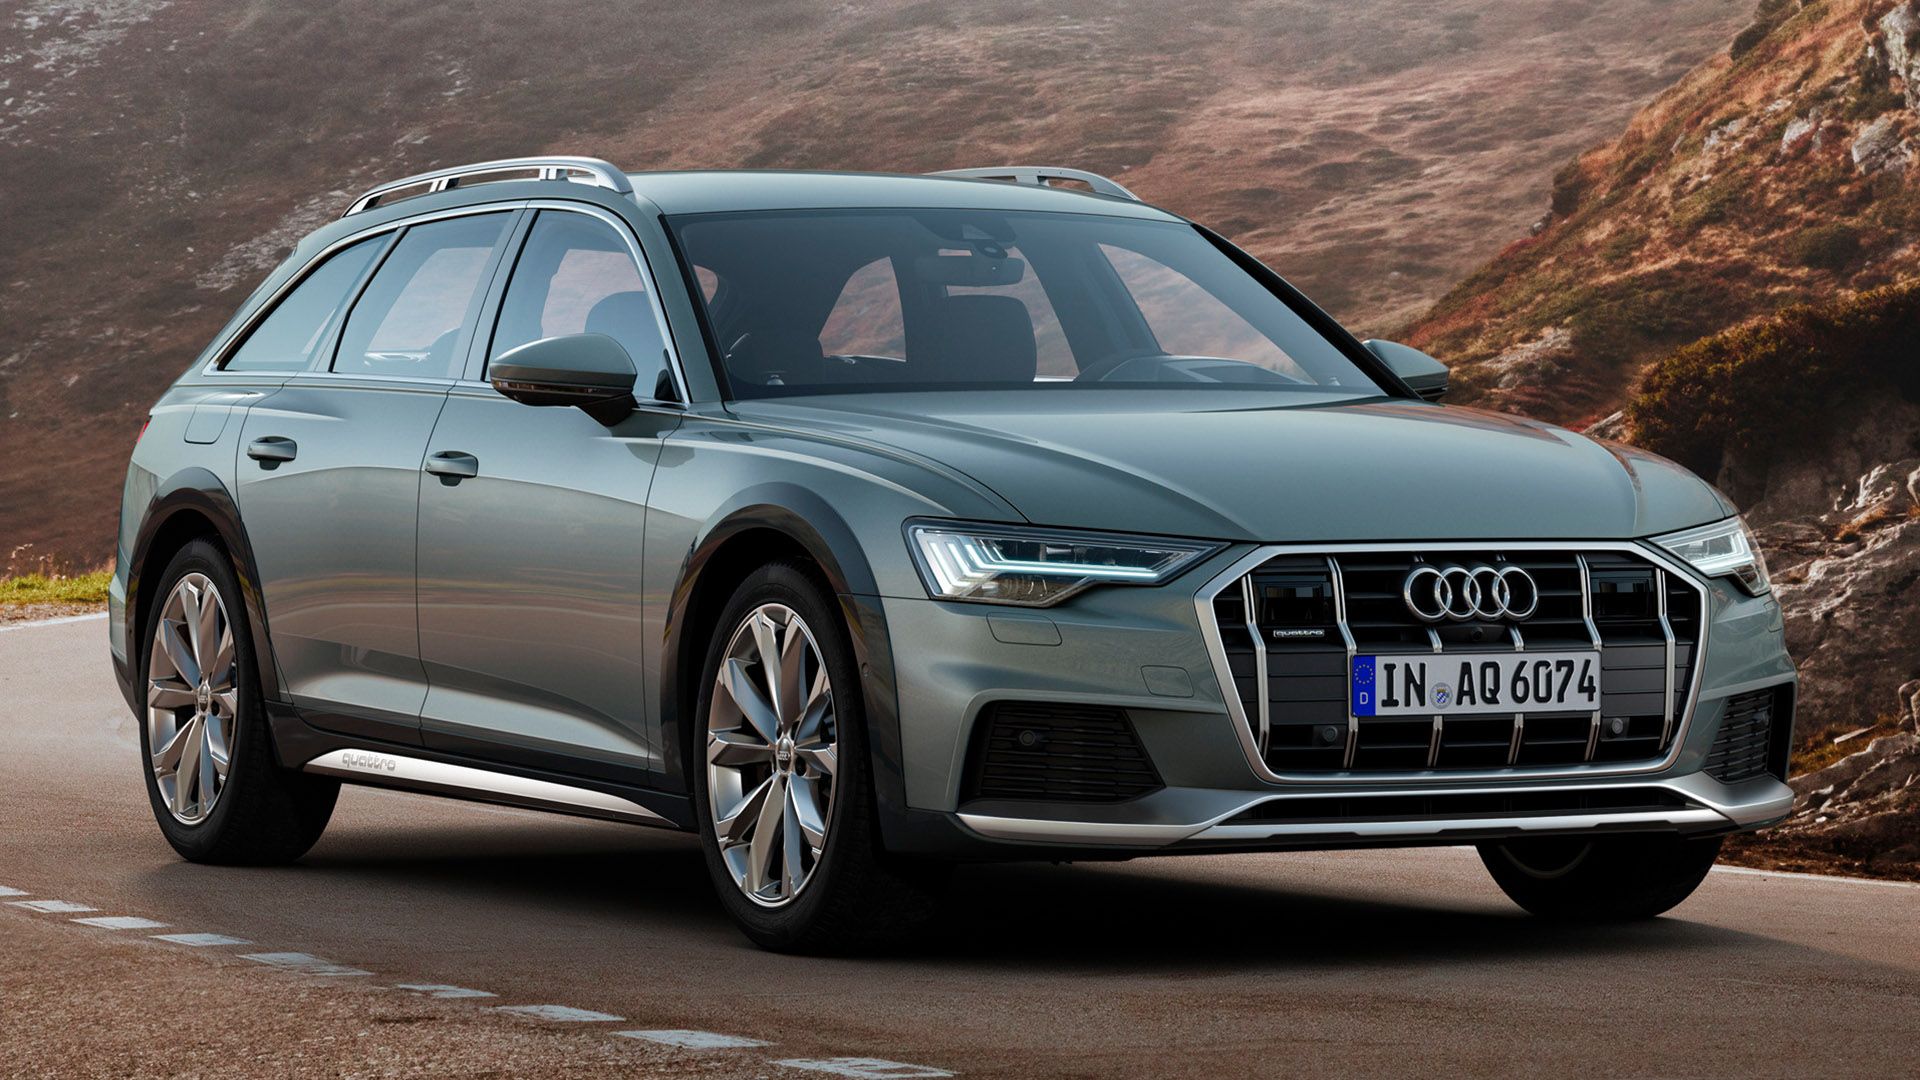 Grey Audi A6 allroad quattro drives on a road in the mountains